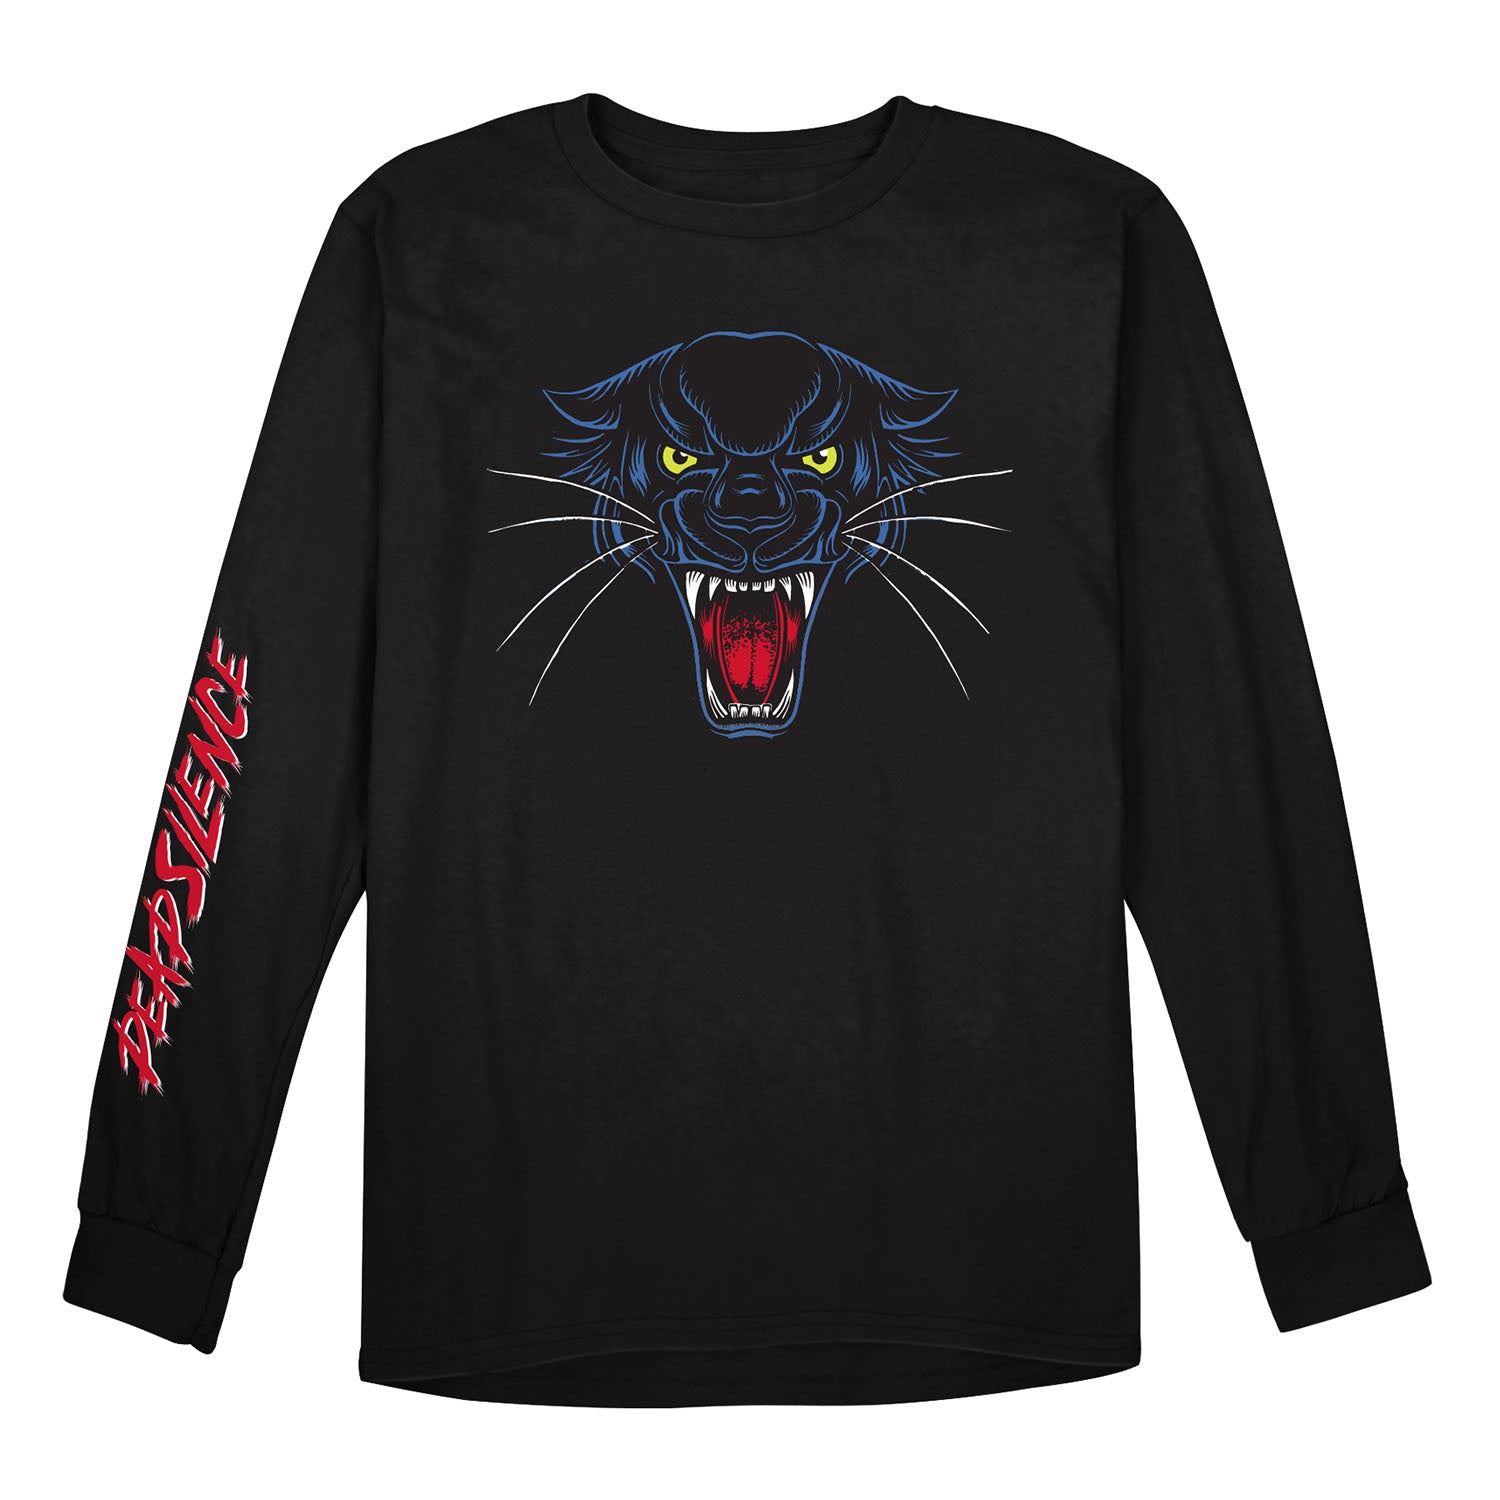 Call of Duty Black Dead Silence Long Sleeve T-Shirt - Front View